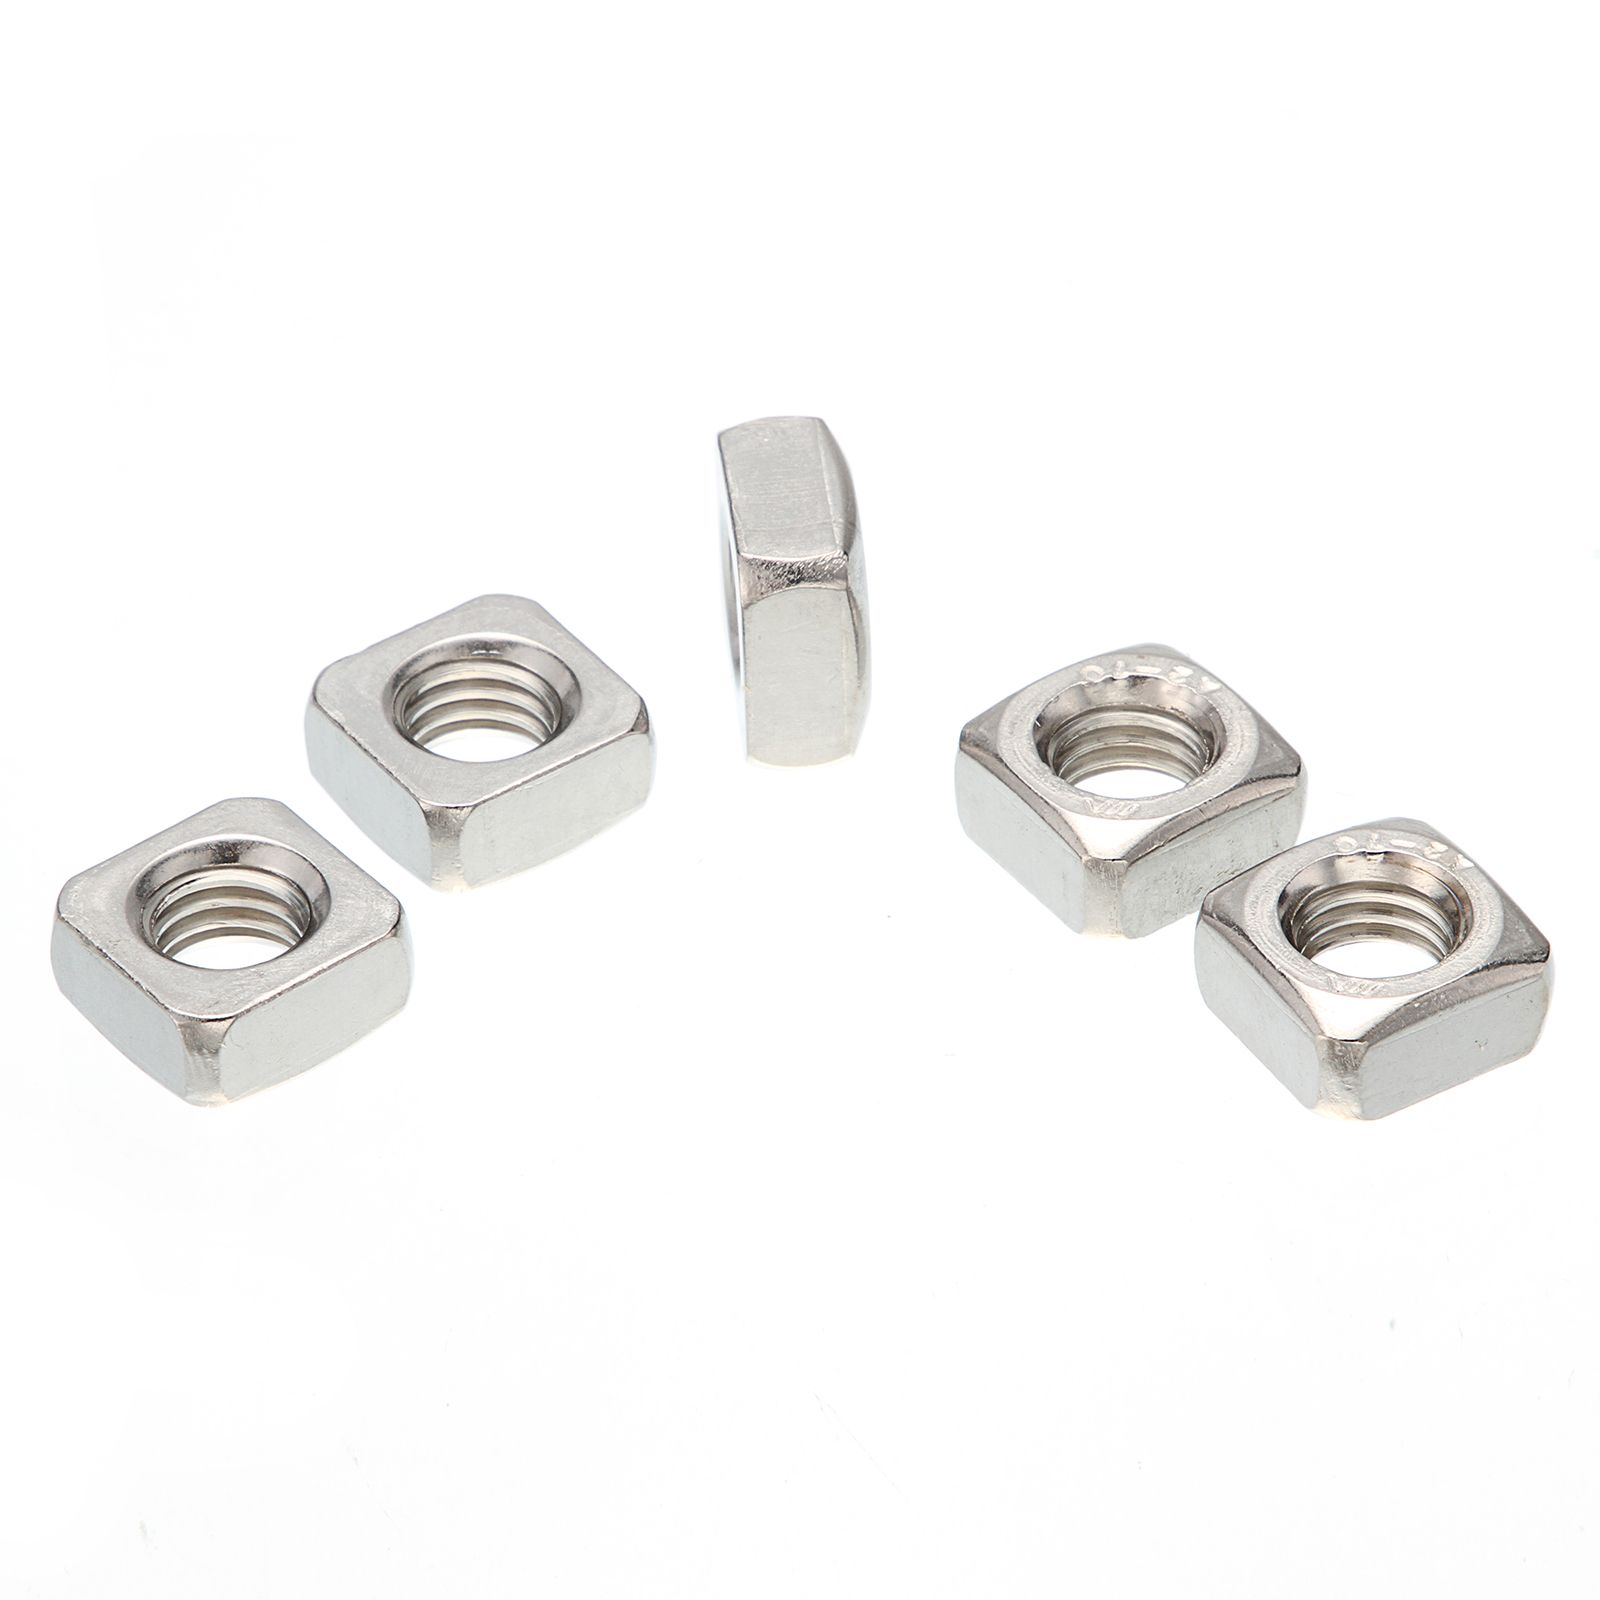 50 Pack Free UK Delivery A2 Stainless Steel M5 Square Nut Square Nuts 5mm Metric Thread